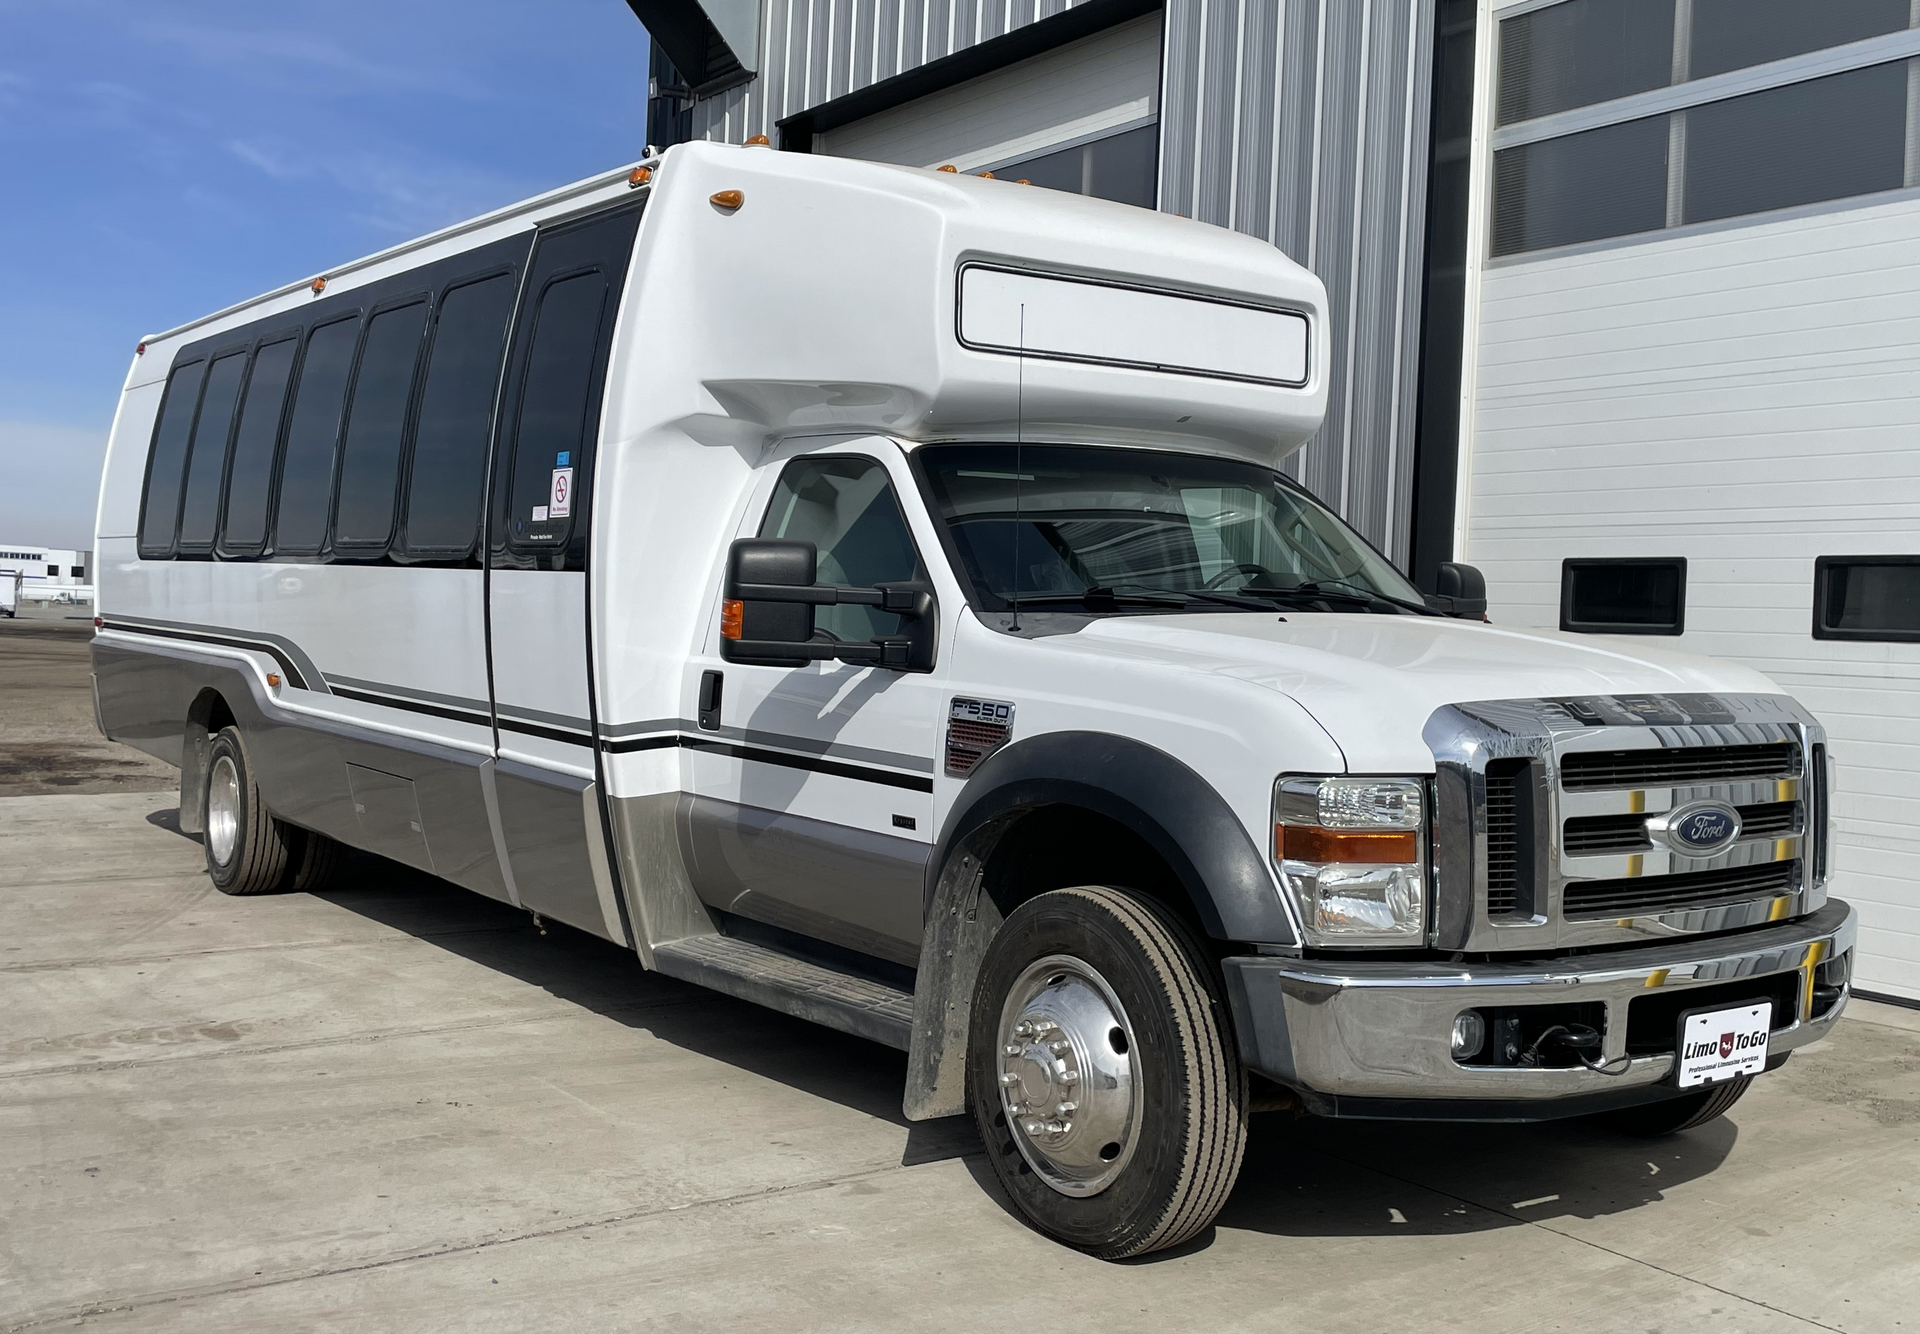 Calgary partybus for 24 passengers